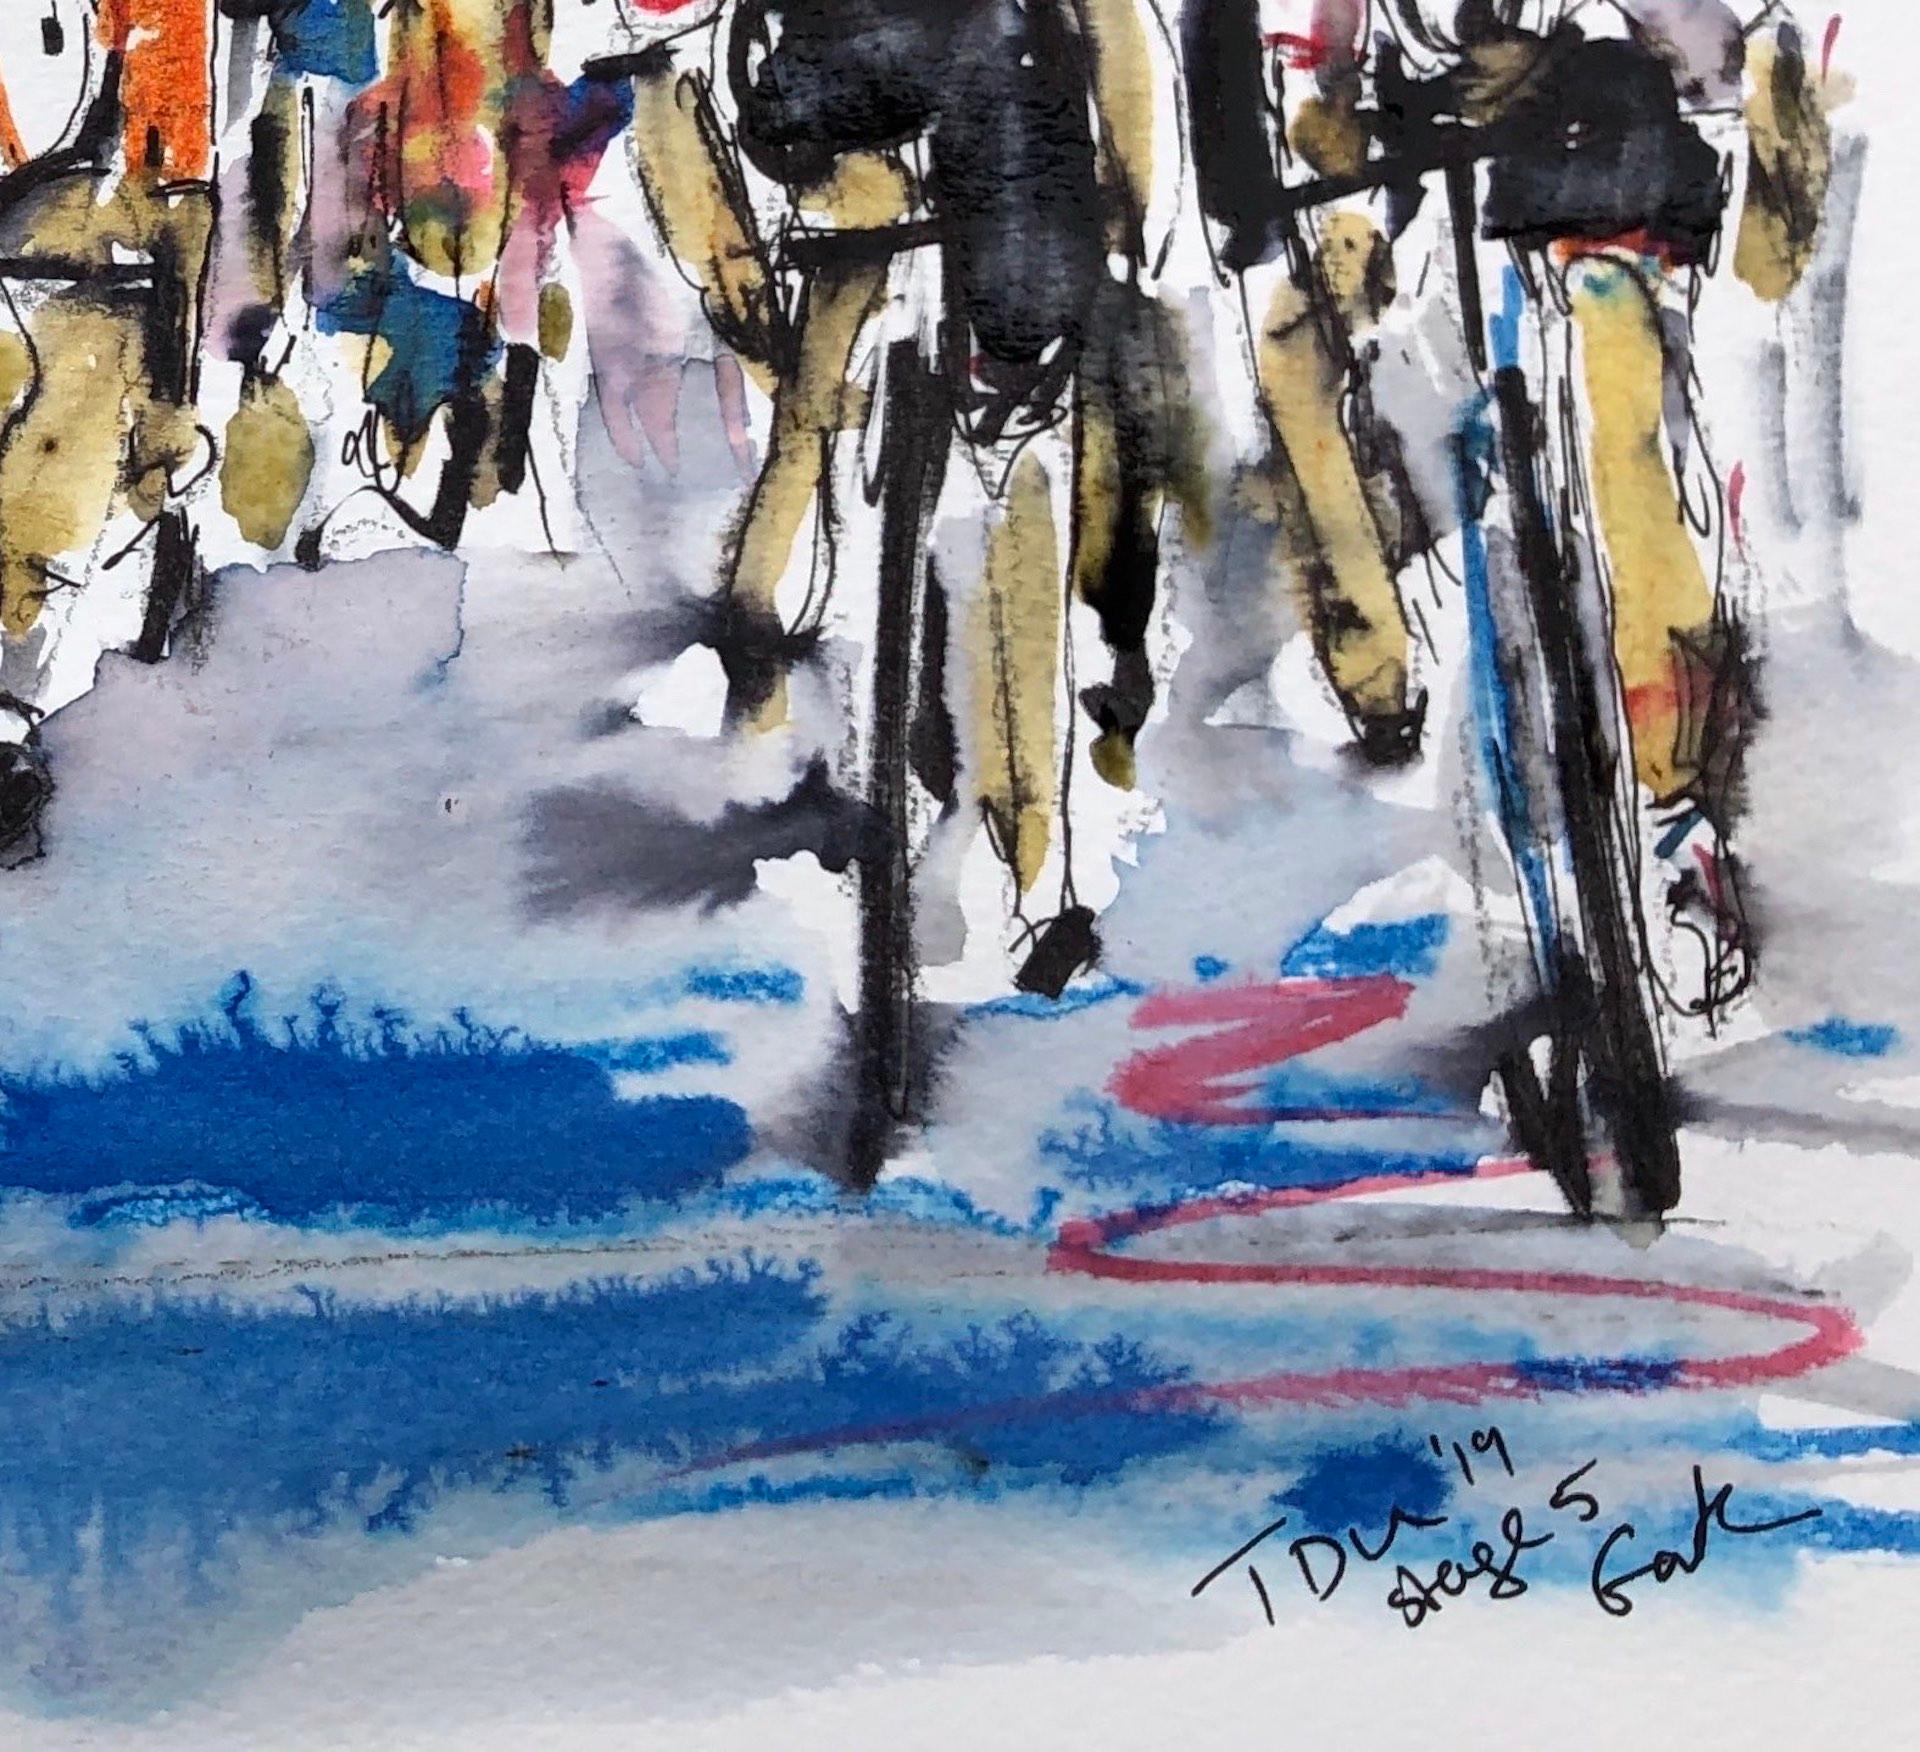 Stage 5 Tour Down Under BY GARTH BAYLEY, Original Cyclist Painting, Sports Art - Gray Abstract Painting by Garth Bayley